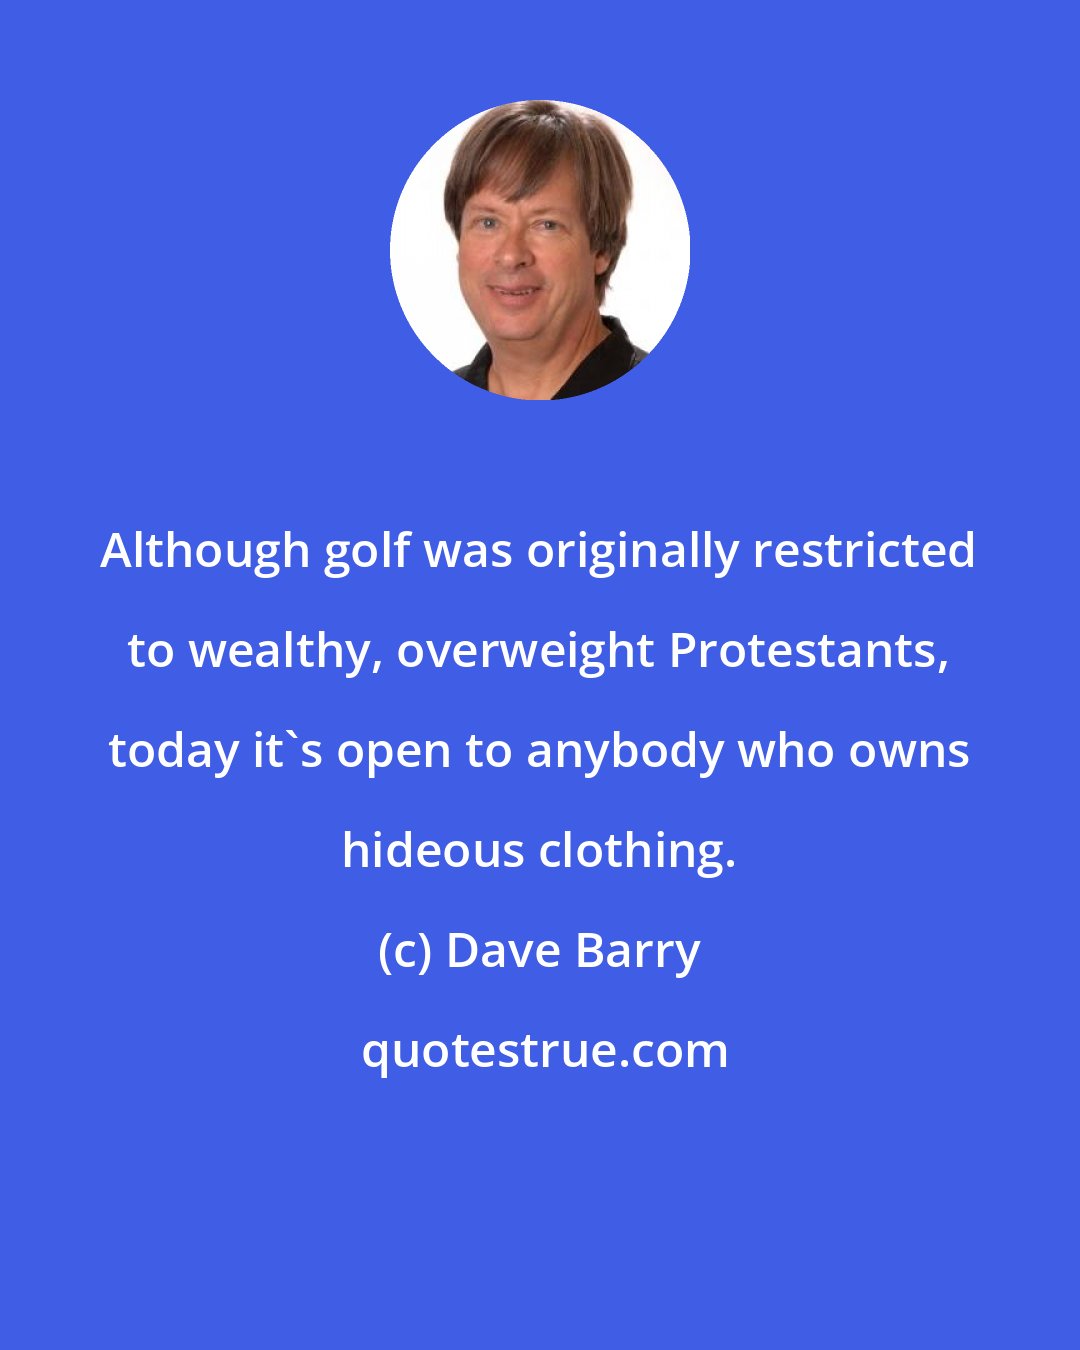 Dave Barry: Although golf was originally restricted to wealthy, overweight Protestants, today it's open to anybody who owns hideous clothing.